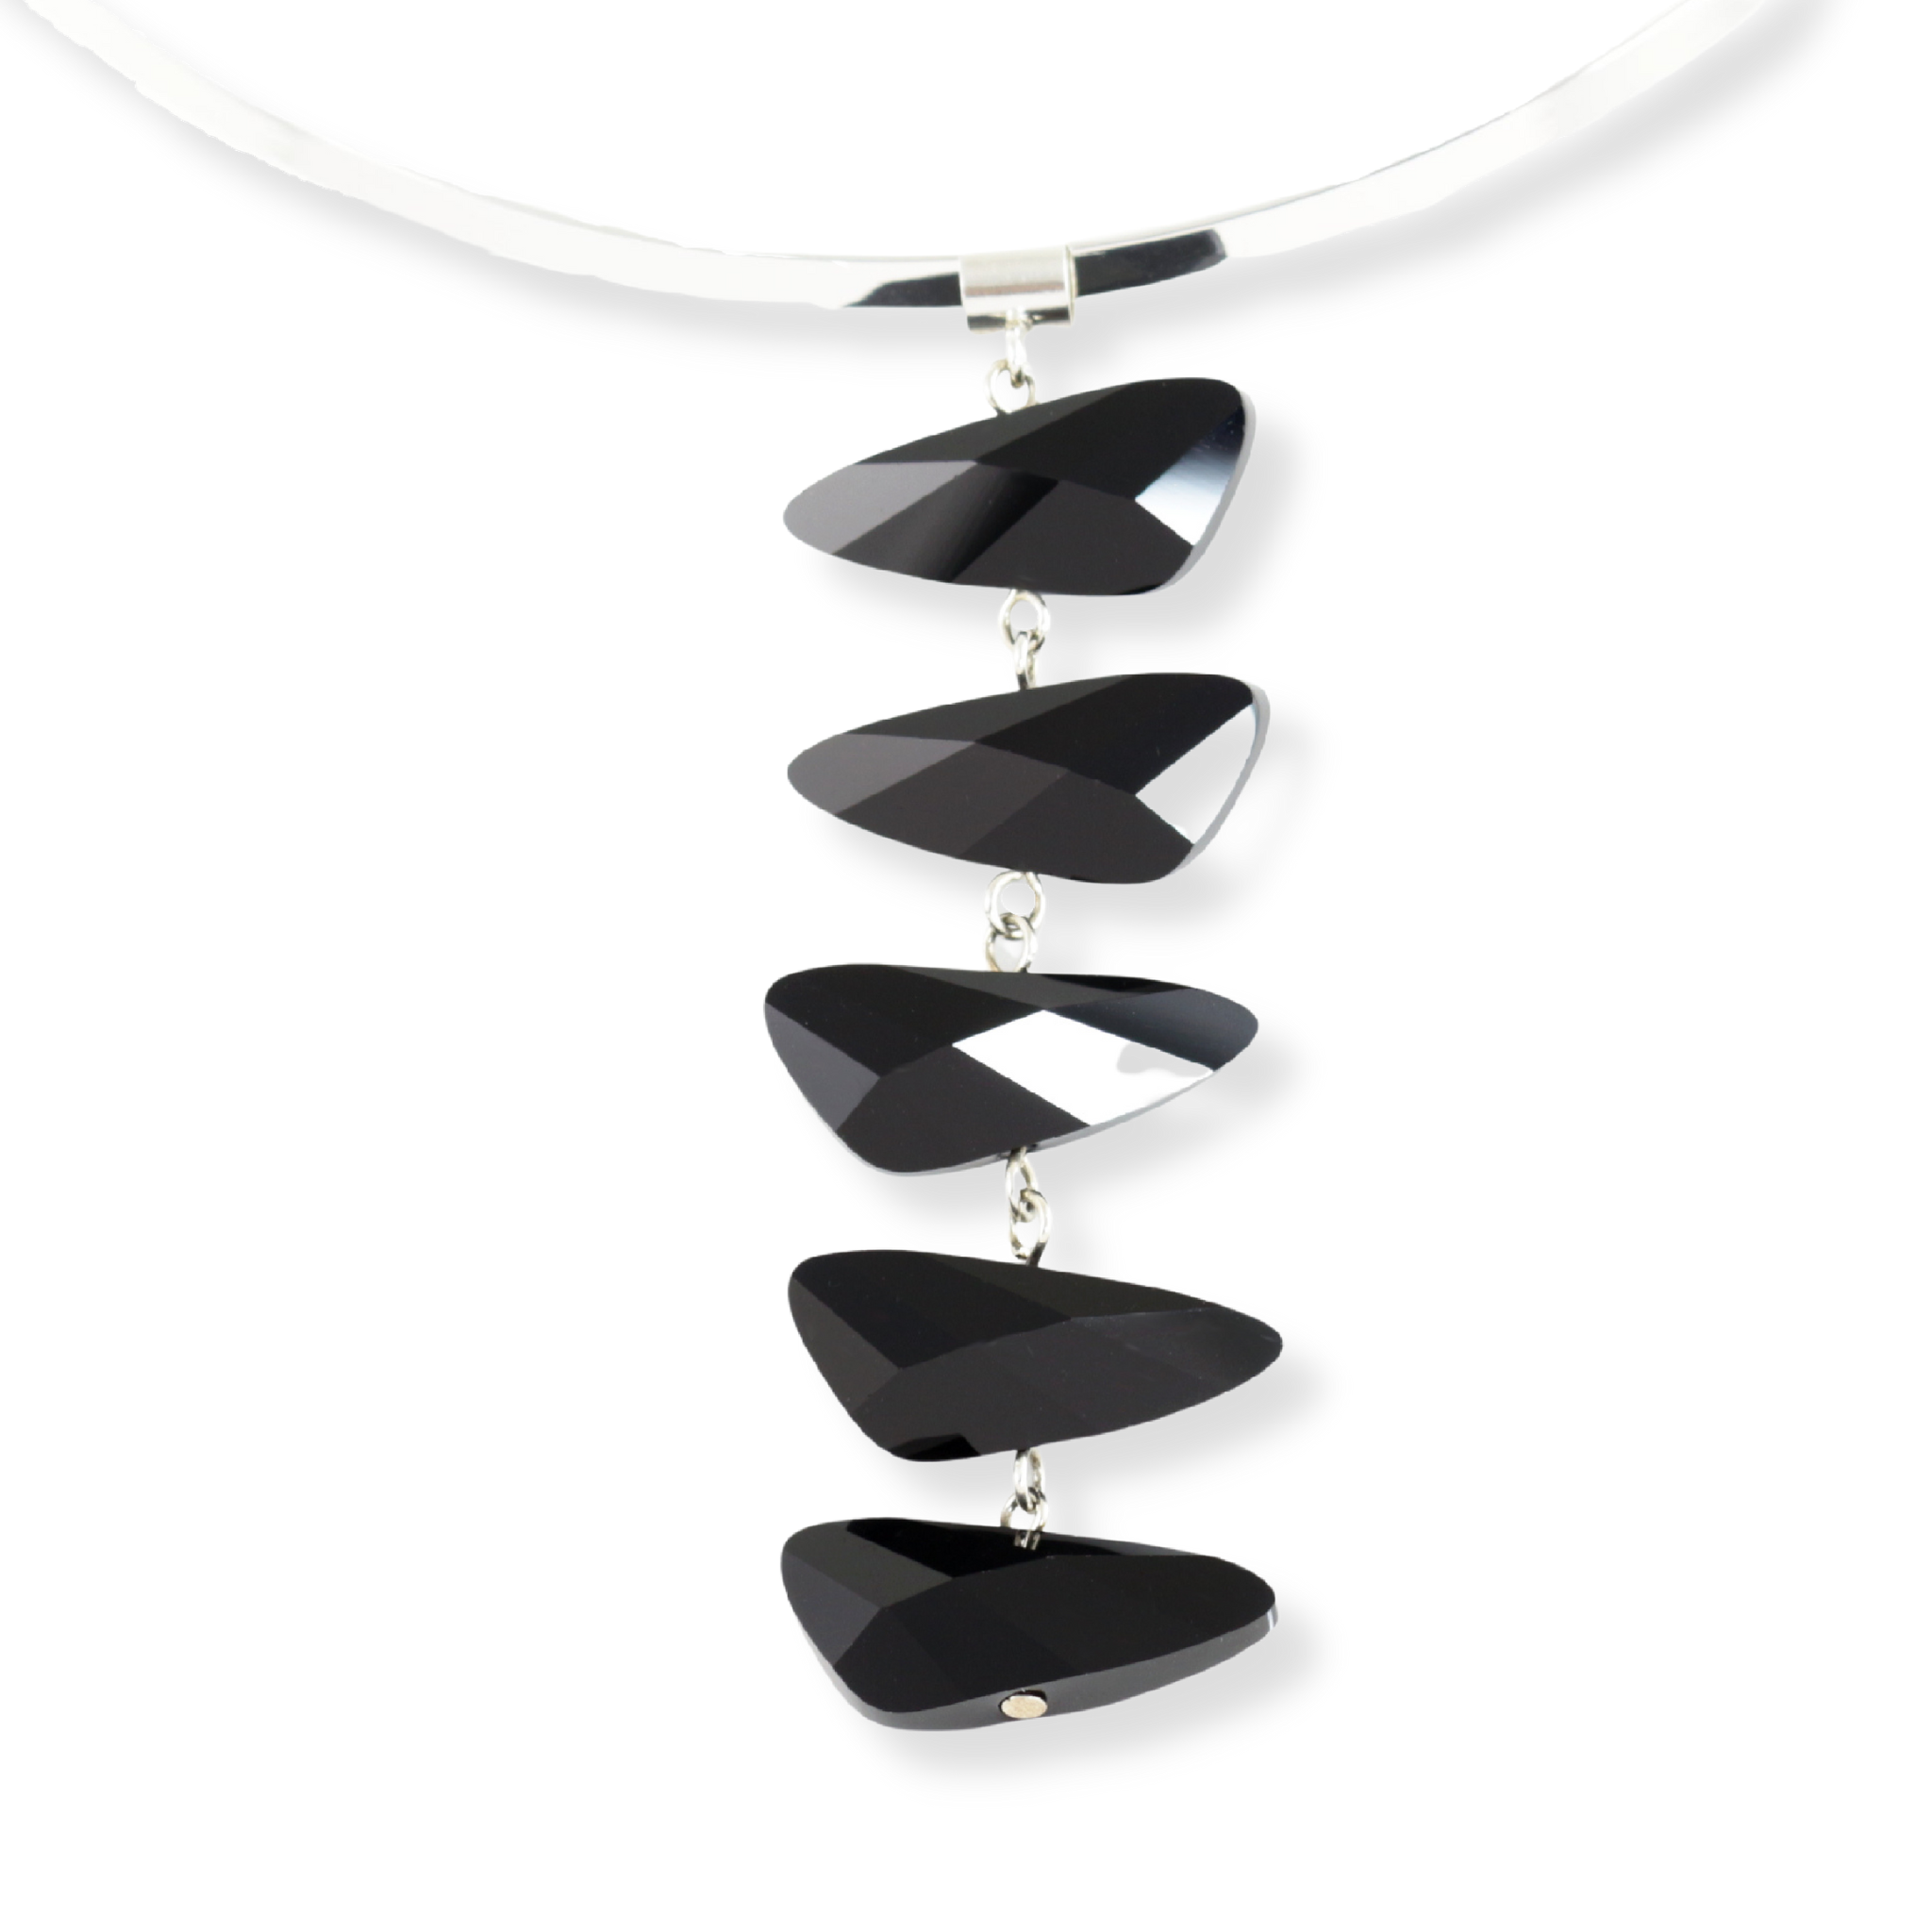 Wing shaped Swarovski crystal pendant necklace in a reflective jet black color. The five crystal pendant hangs on a removeable and interchangeable silver plated brass torque neck wire.